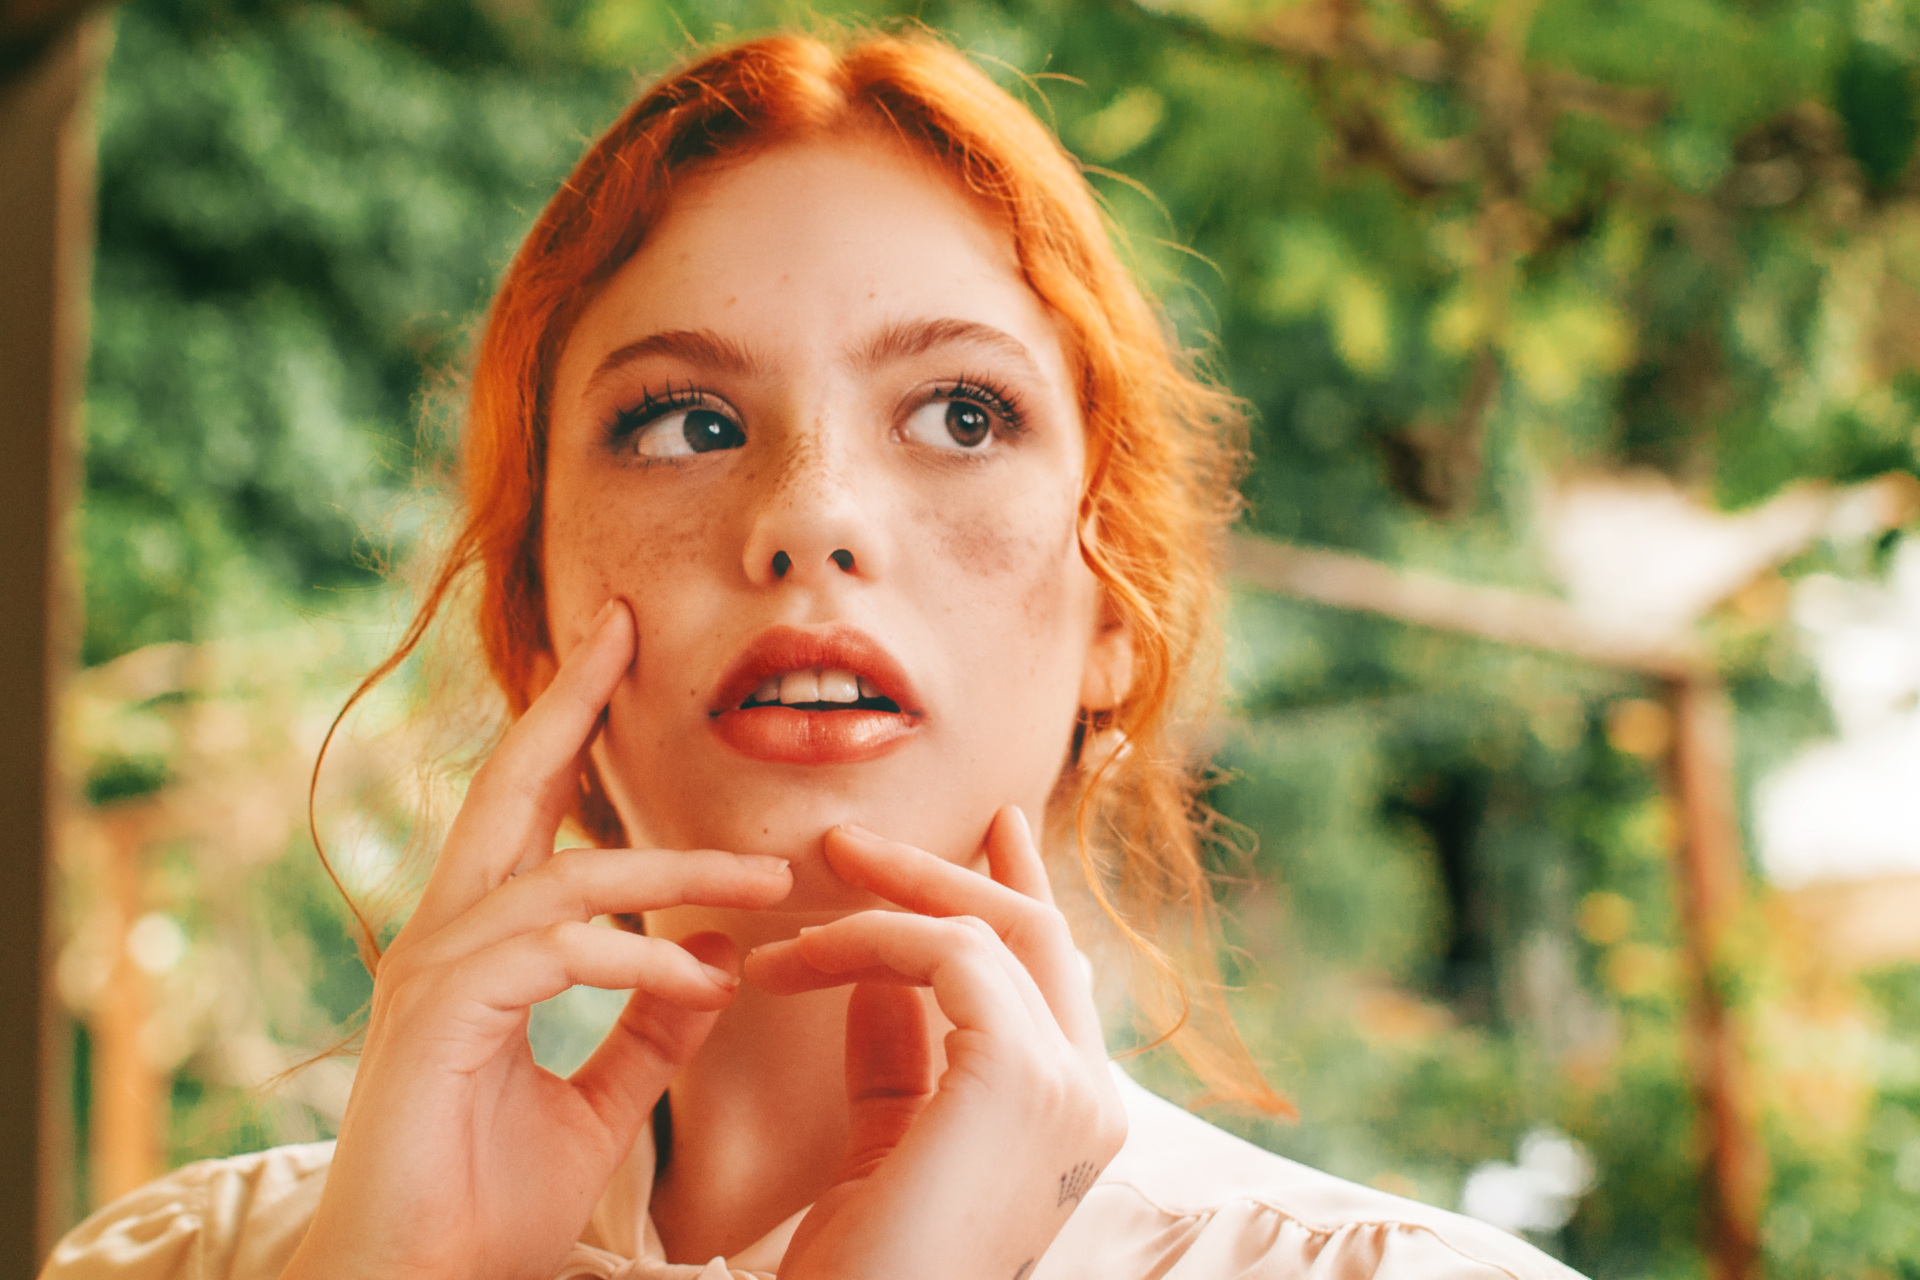 Woman with red hair looking up with hands on her face